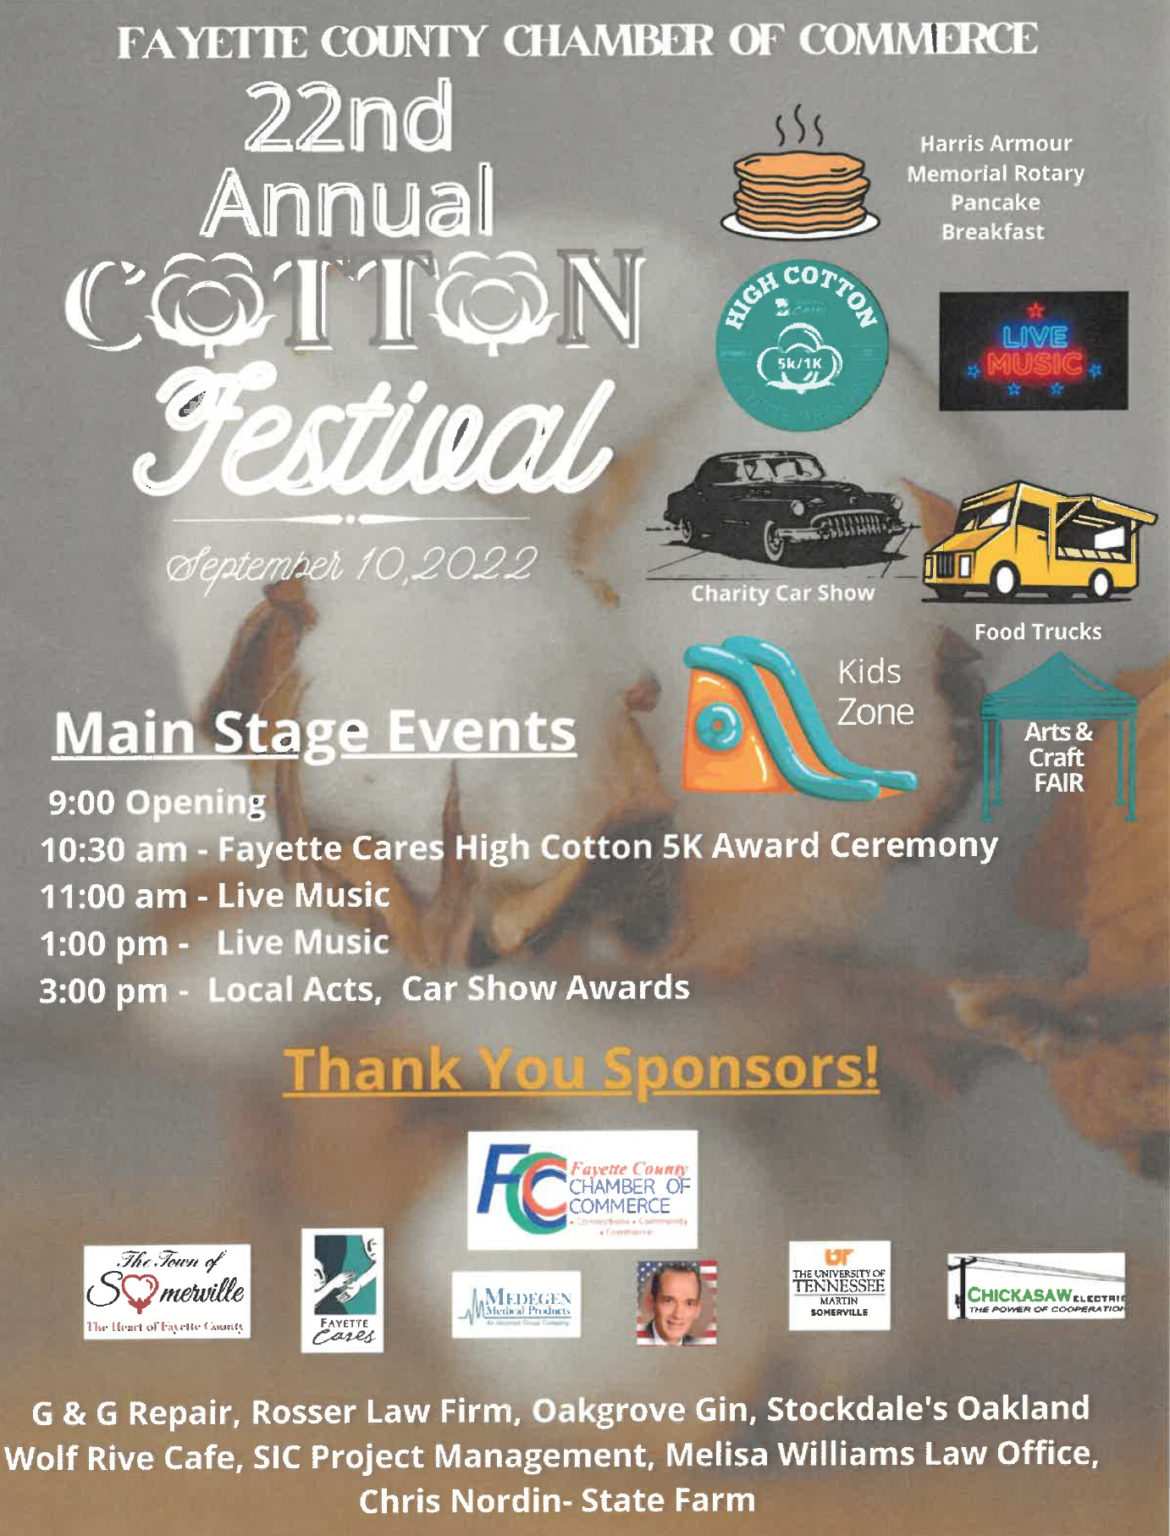 22nd Annual Cotton Festival Fayette County Chamber